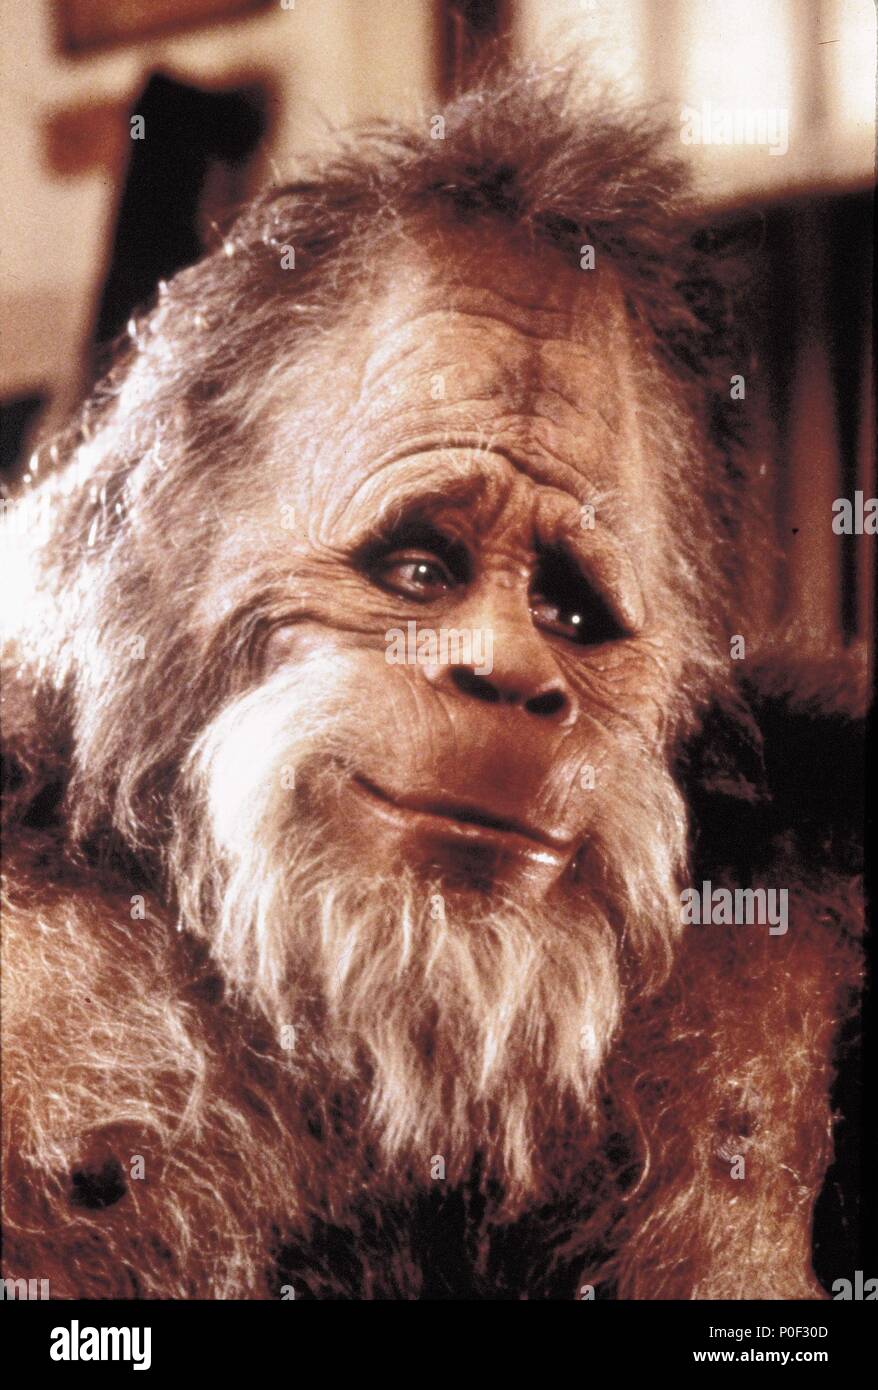 Original Film Title: HARRY AND THE HENDERSONS.  English Title: BIGFOOT AND THE HENDERSONS.  Film Director: WILLIAM DEAR.  Year: 1987.  Stars: KEVIN PETER HALL. Credit: AMBLIN/UNIVERSAL / Album Stock Photo